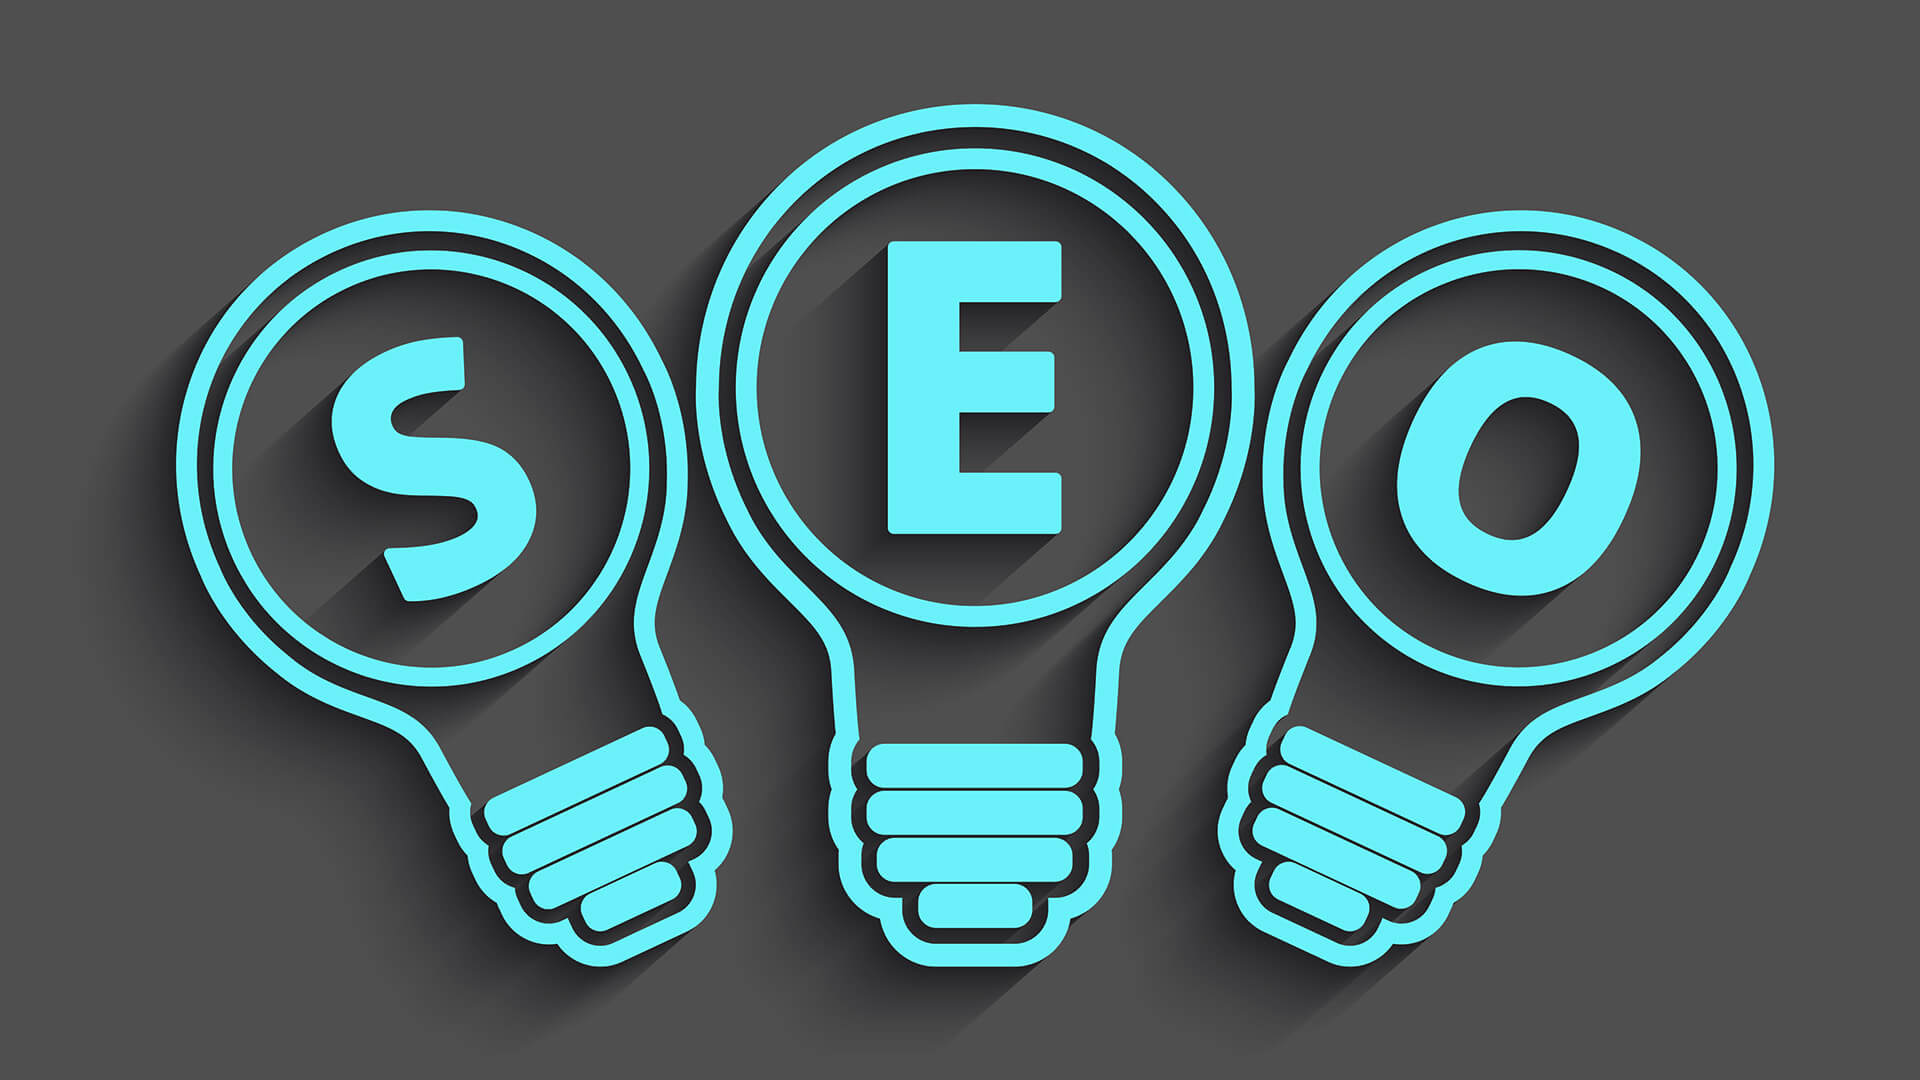 Who Will Benefit From SEO?